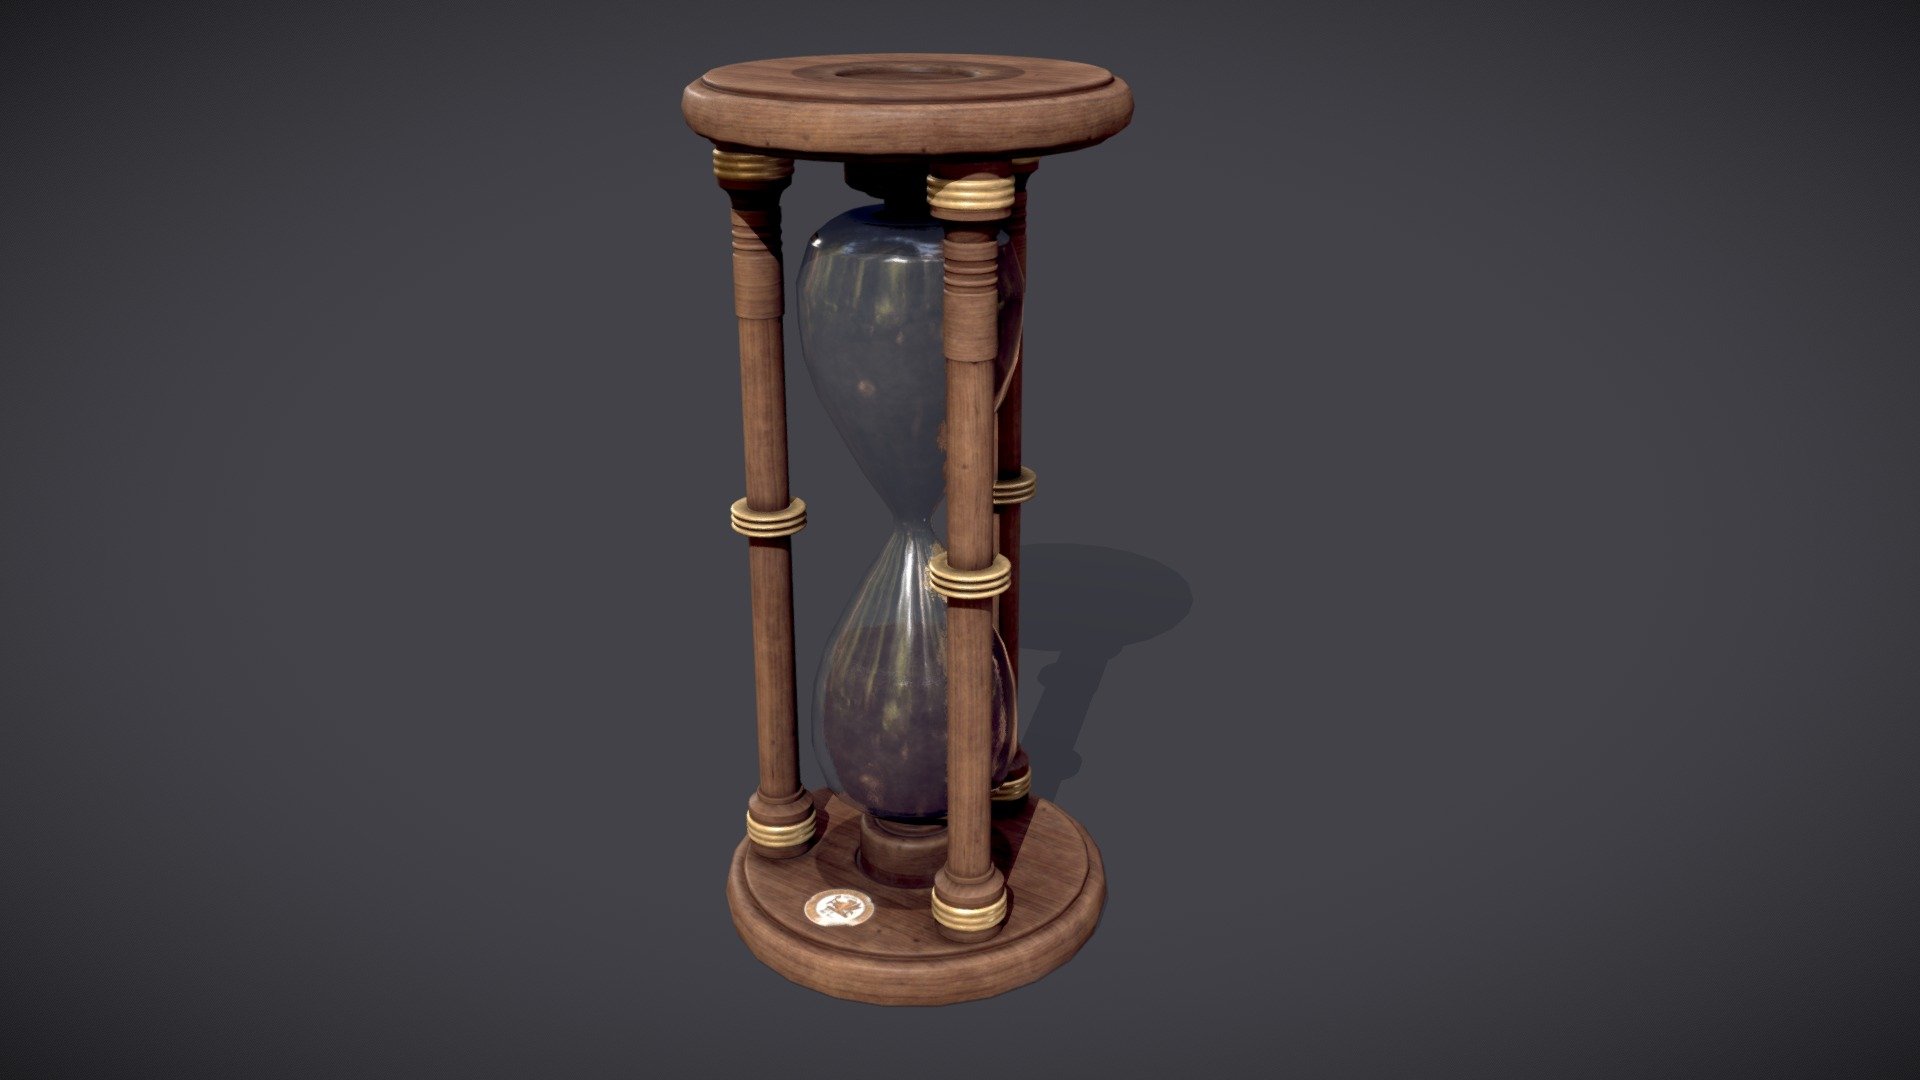 A late 19th century Pirata Hourglass made in Blender and Substance Painter.

I am making a lot of props as practice at the moment before I gain the confidence to do a larger scene. This was a particularly fun one to paint 3d model